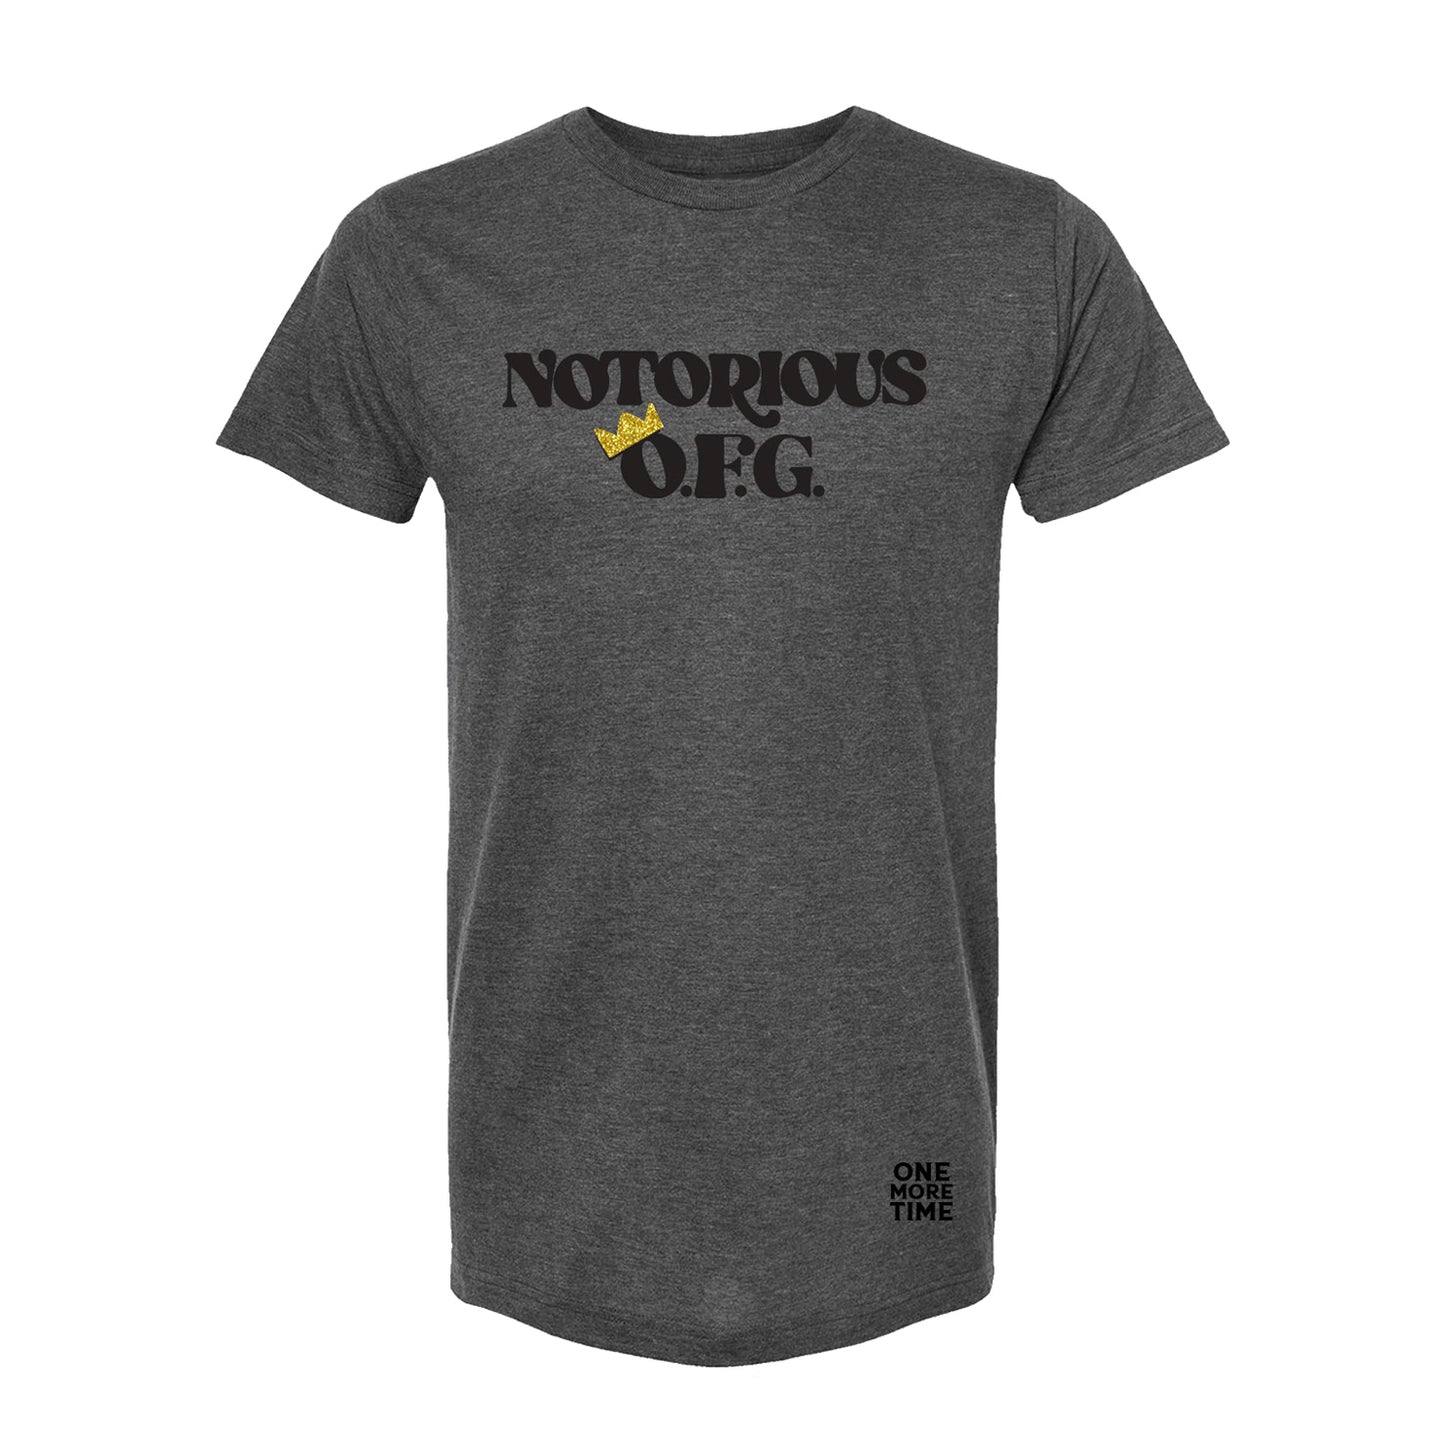 Once Upon A One More Time Notorious OFG T-Shirt